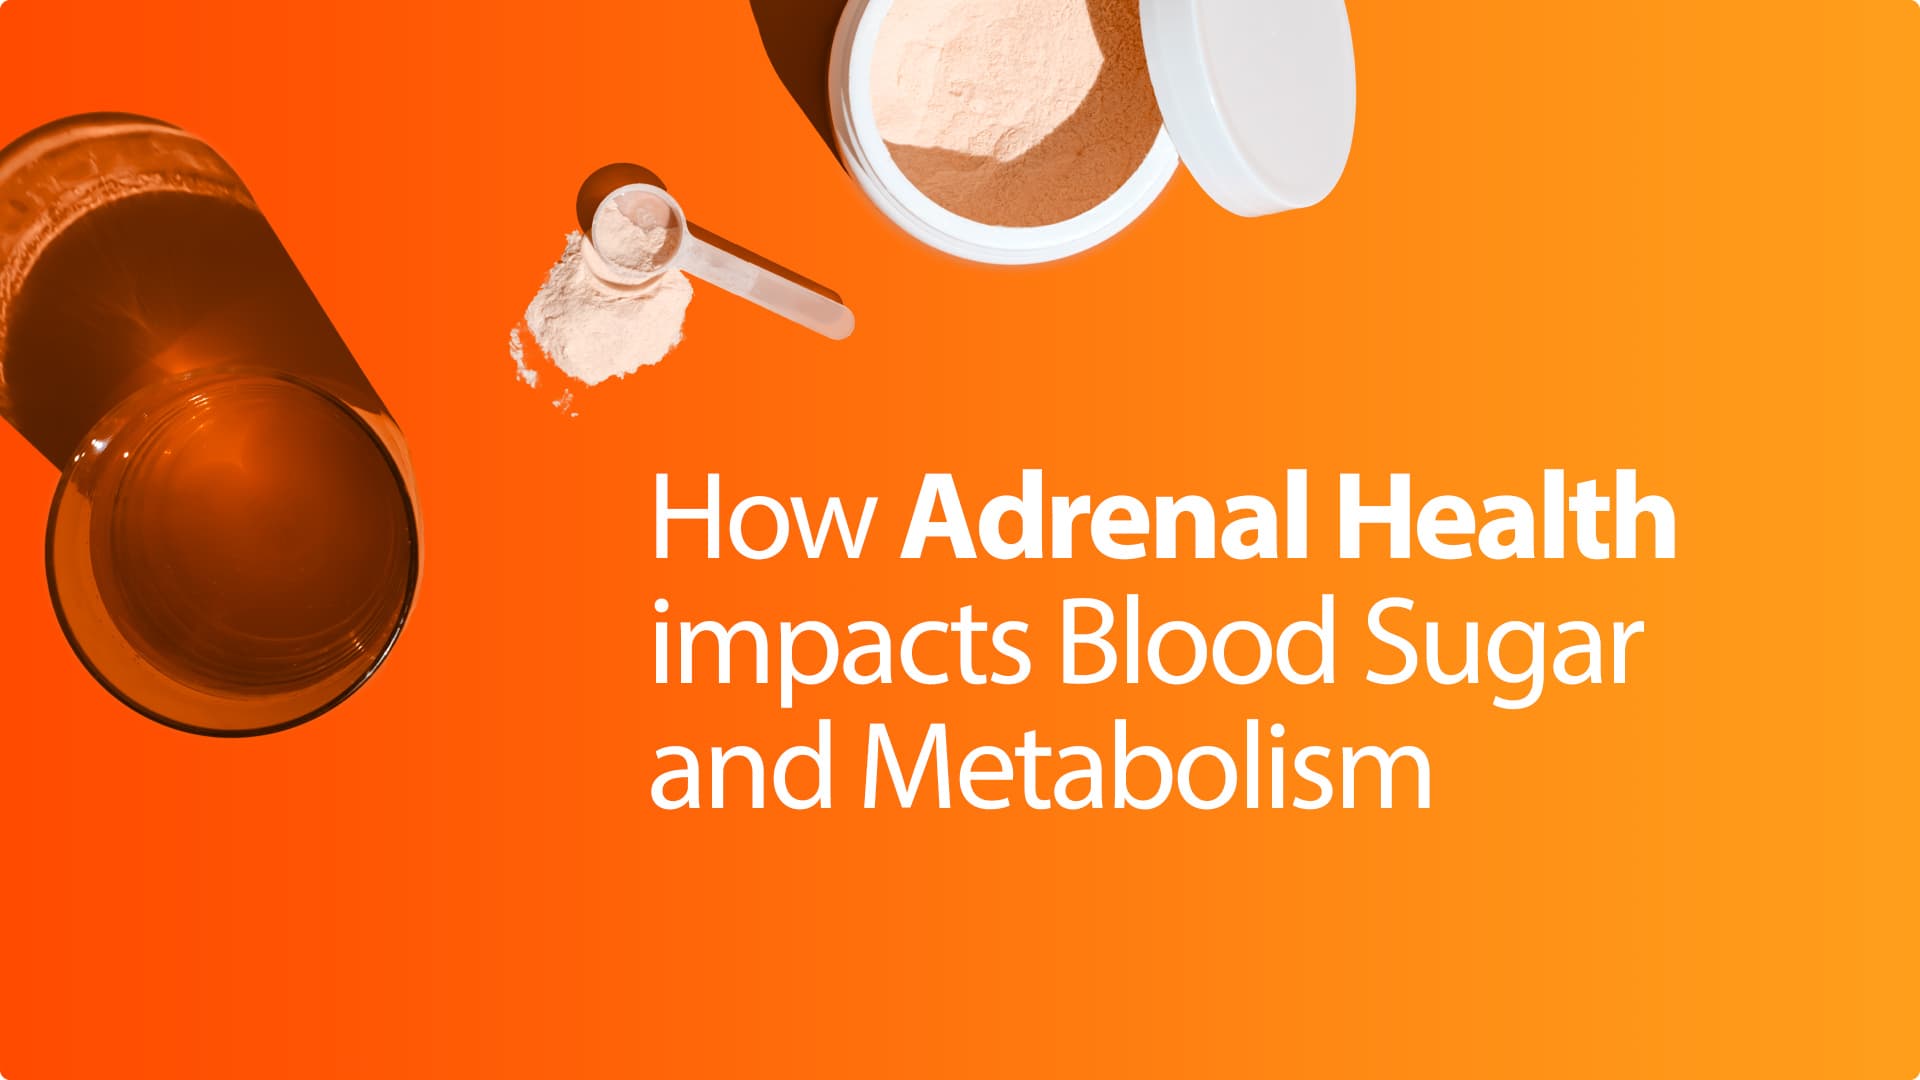 How Adrenal Health Impacts Blood Sugar and Metabolism